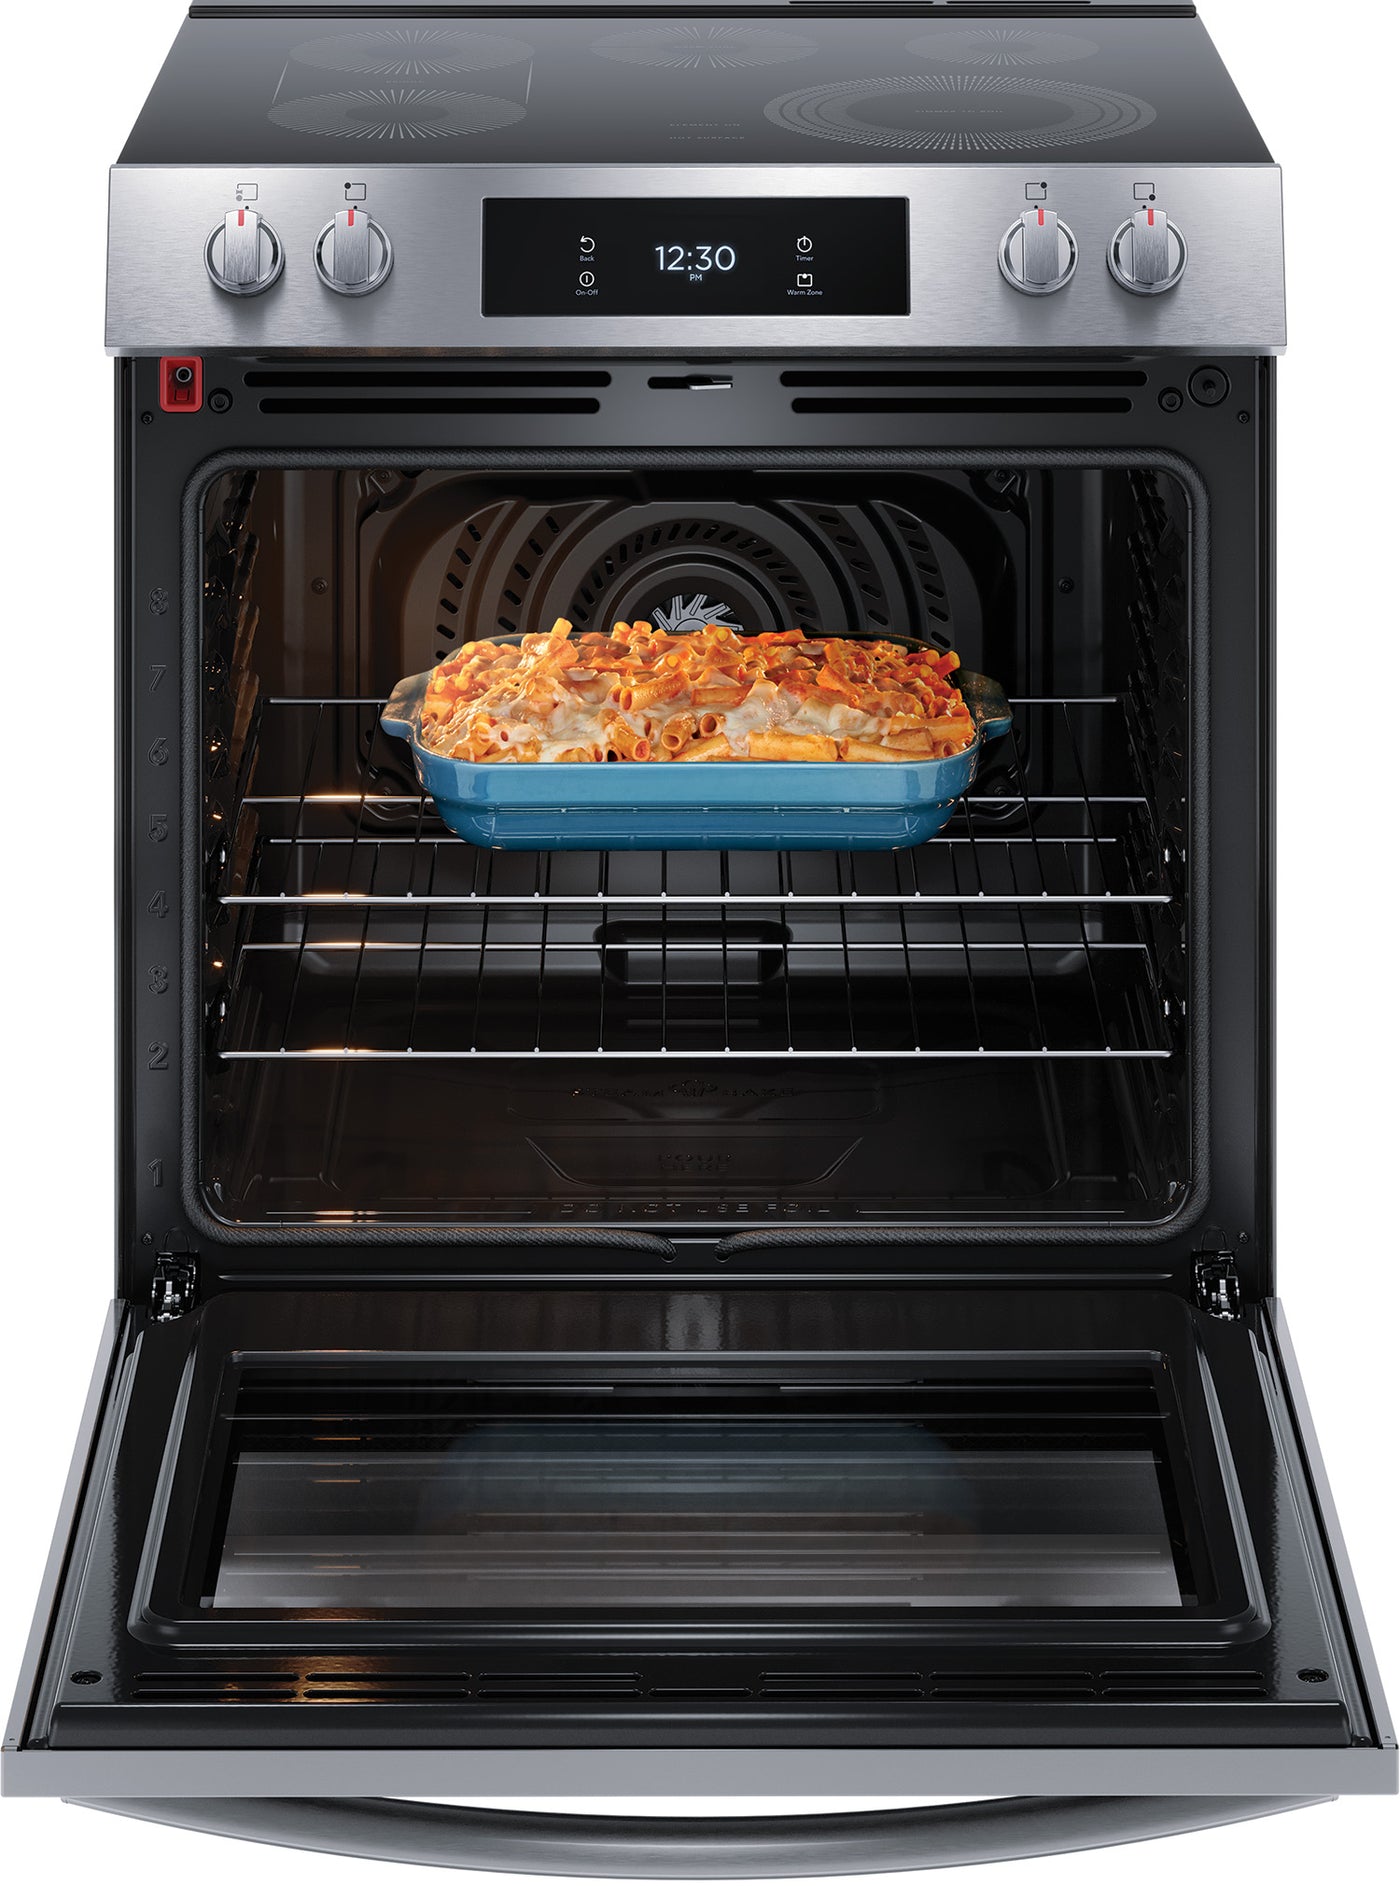 Frigidaire Gallery Smudge-Proof Stainless Steel 30" Front Control Electric Range with Total Convection (6.2 Cu. Ft) - GCFE306CBF